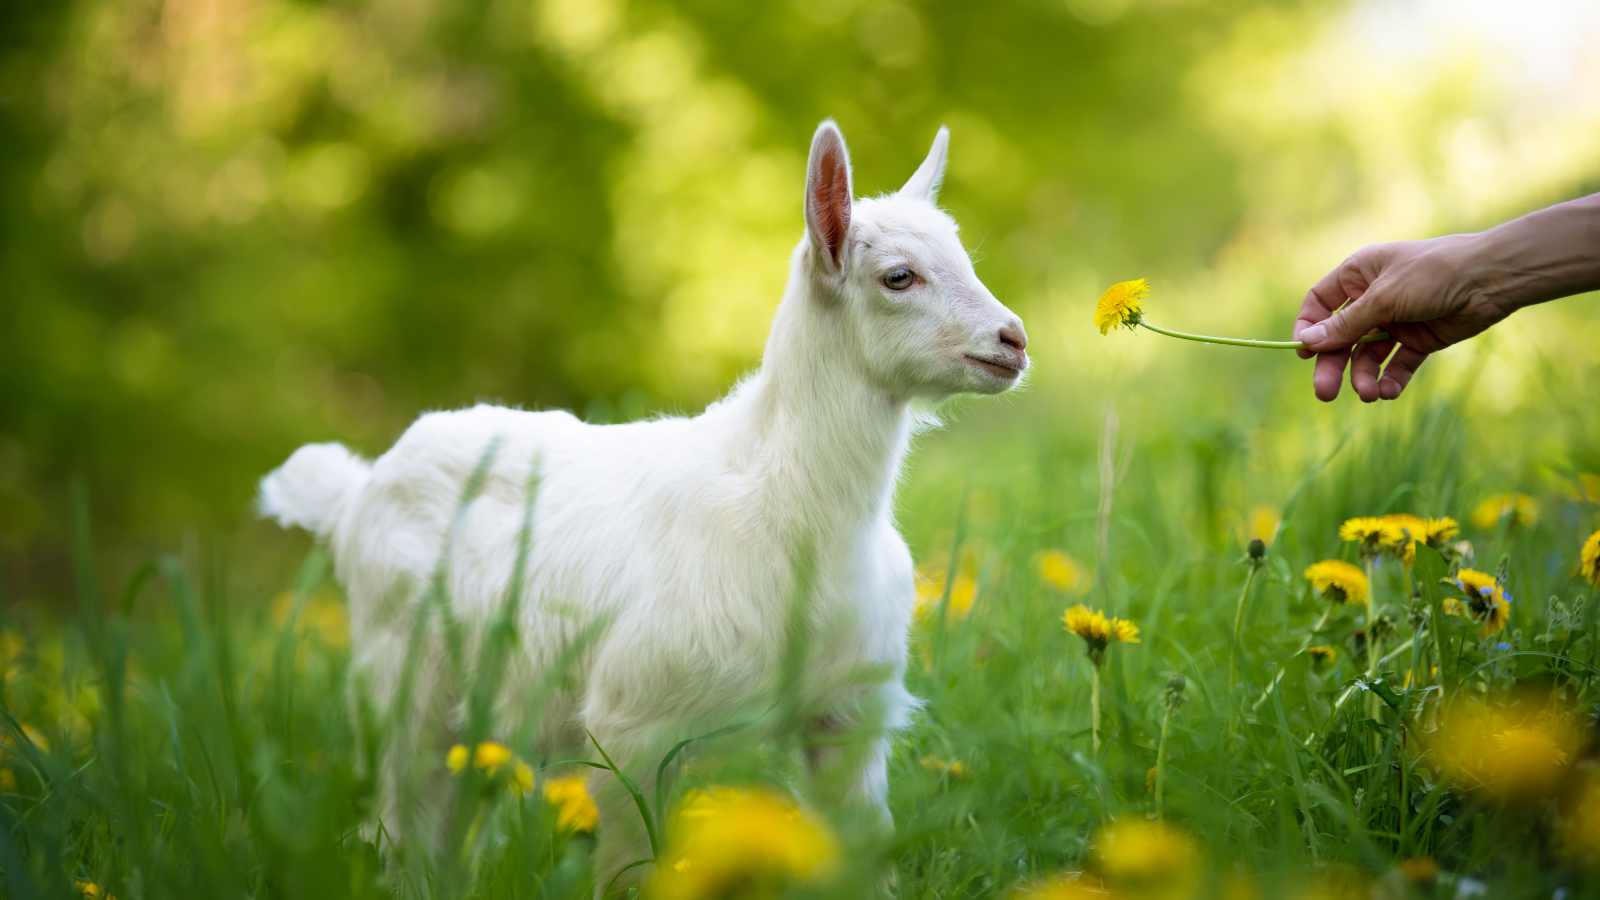 A white baby goat in profile stands in a lush green field in spring.